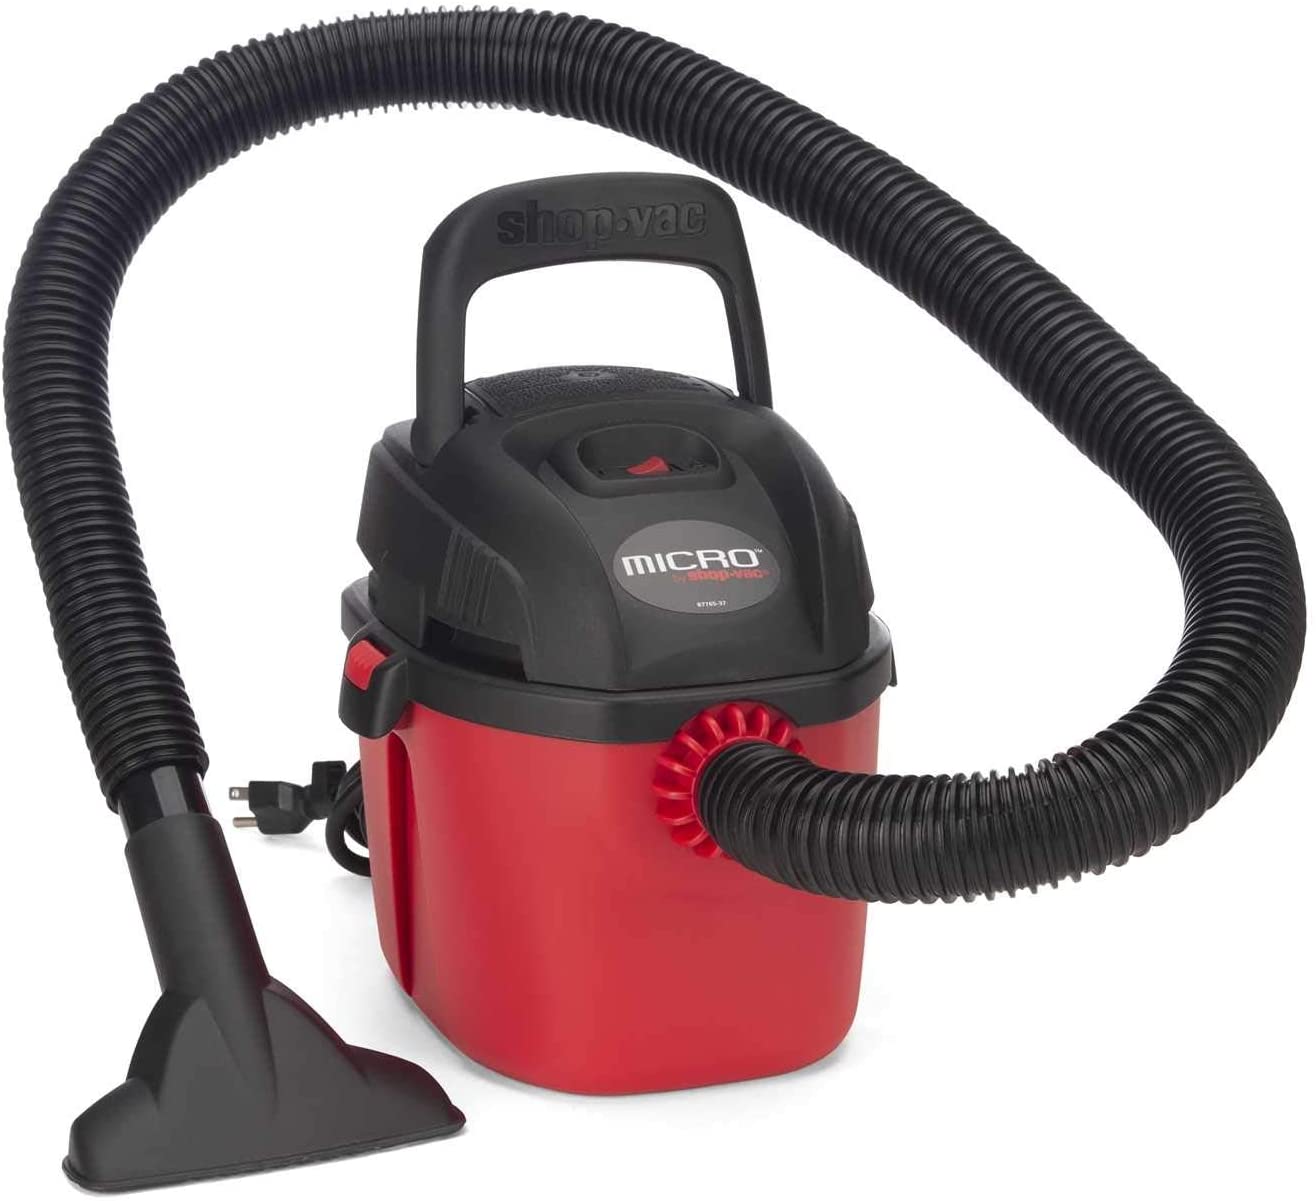 Best Shop Vac for Woodworking – Review & Buying Guide